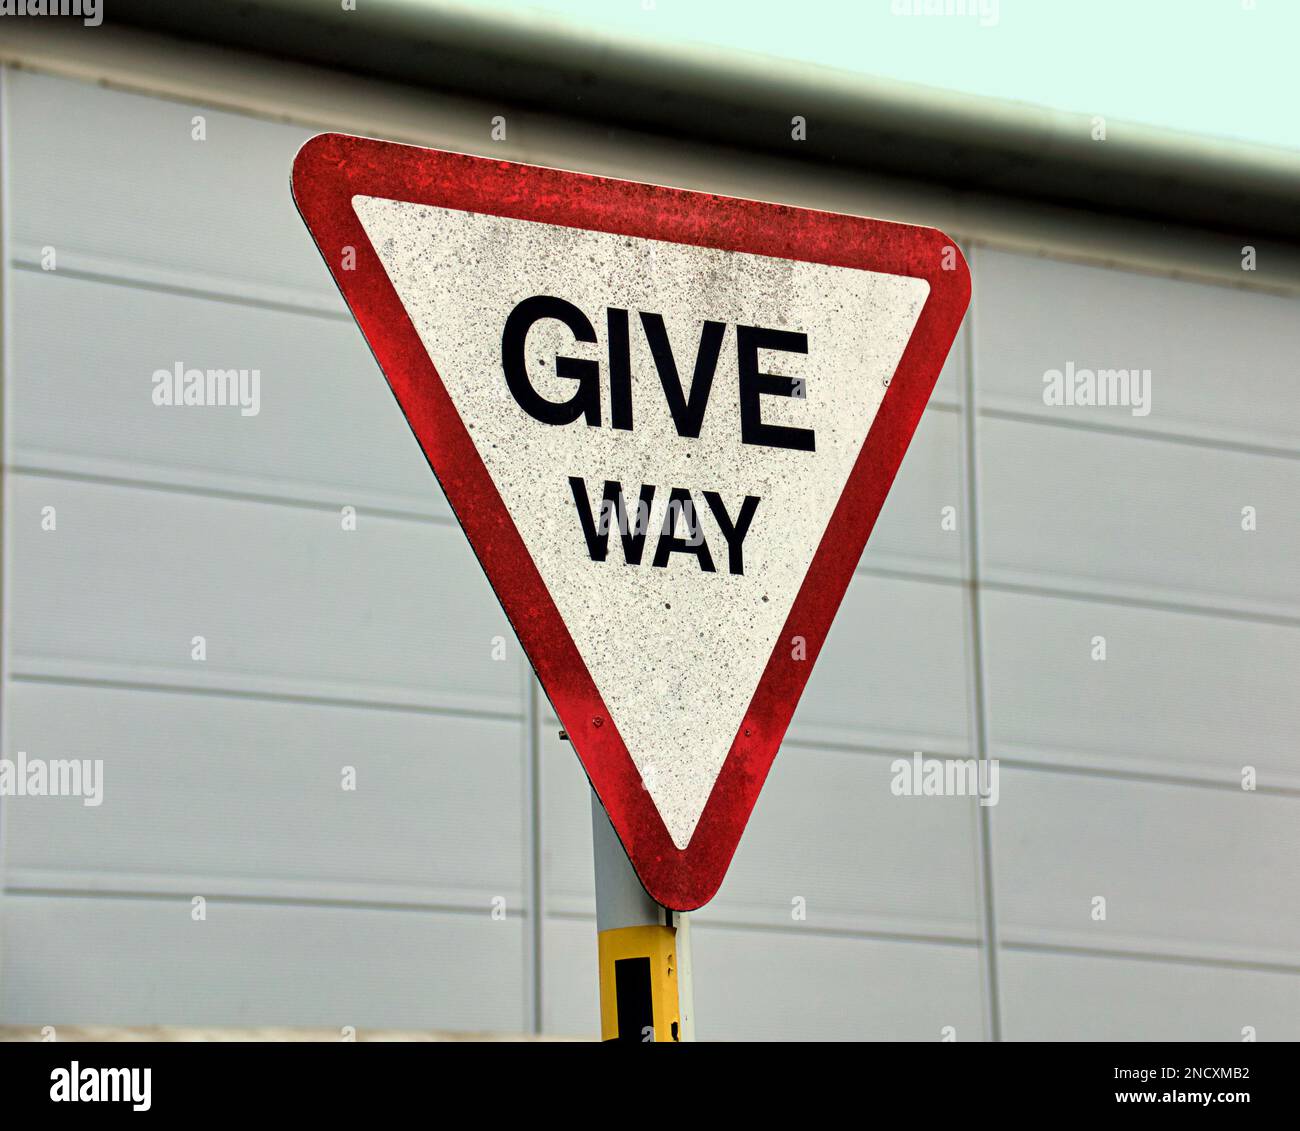 give way sign Stock Photo